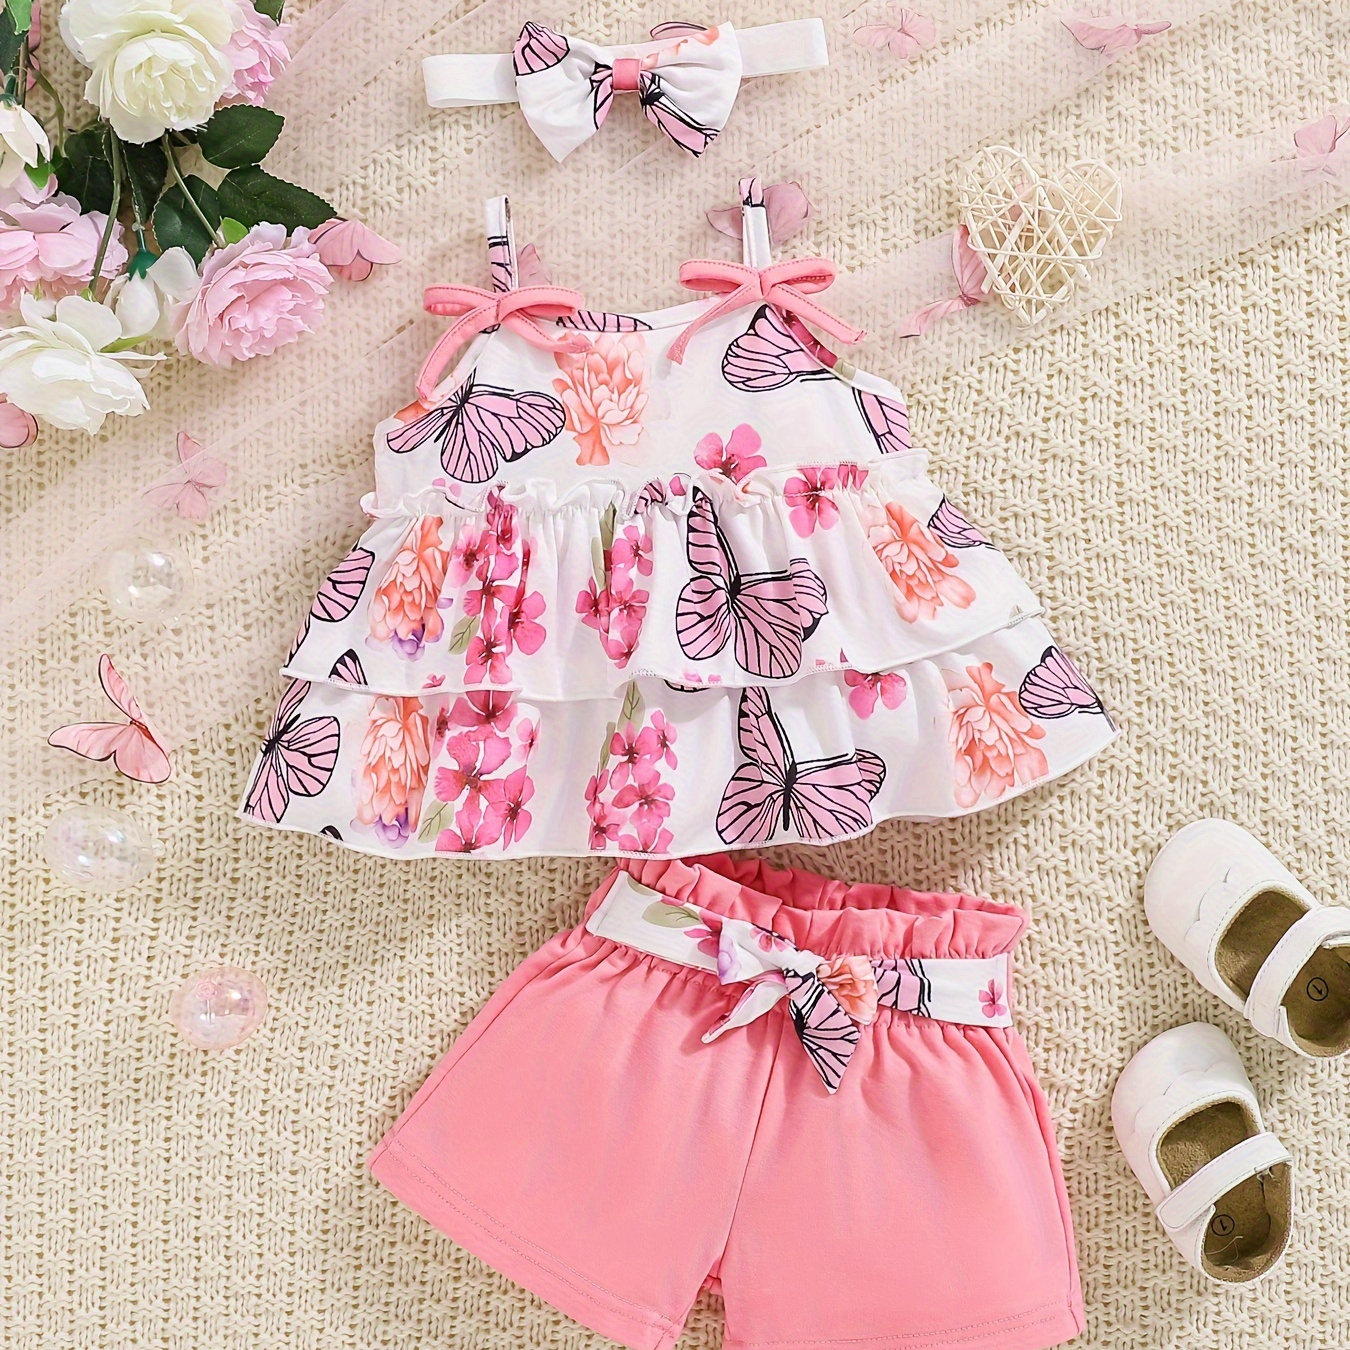 

Baby's Cartoon Butterfly & Flower Pattern 2pcs Summer Outfit, Layered Cami Top & Headband & Shorts Set, Toddler & Infant Girl's Clothes For Daily/holiday, As Gift